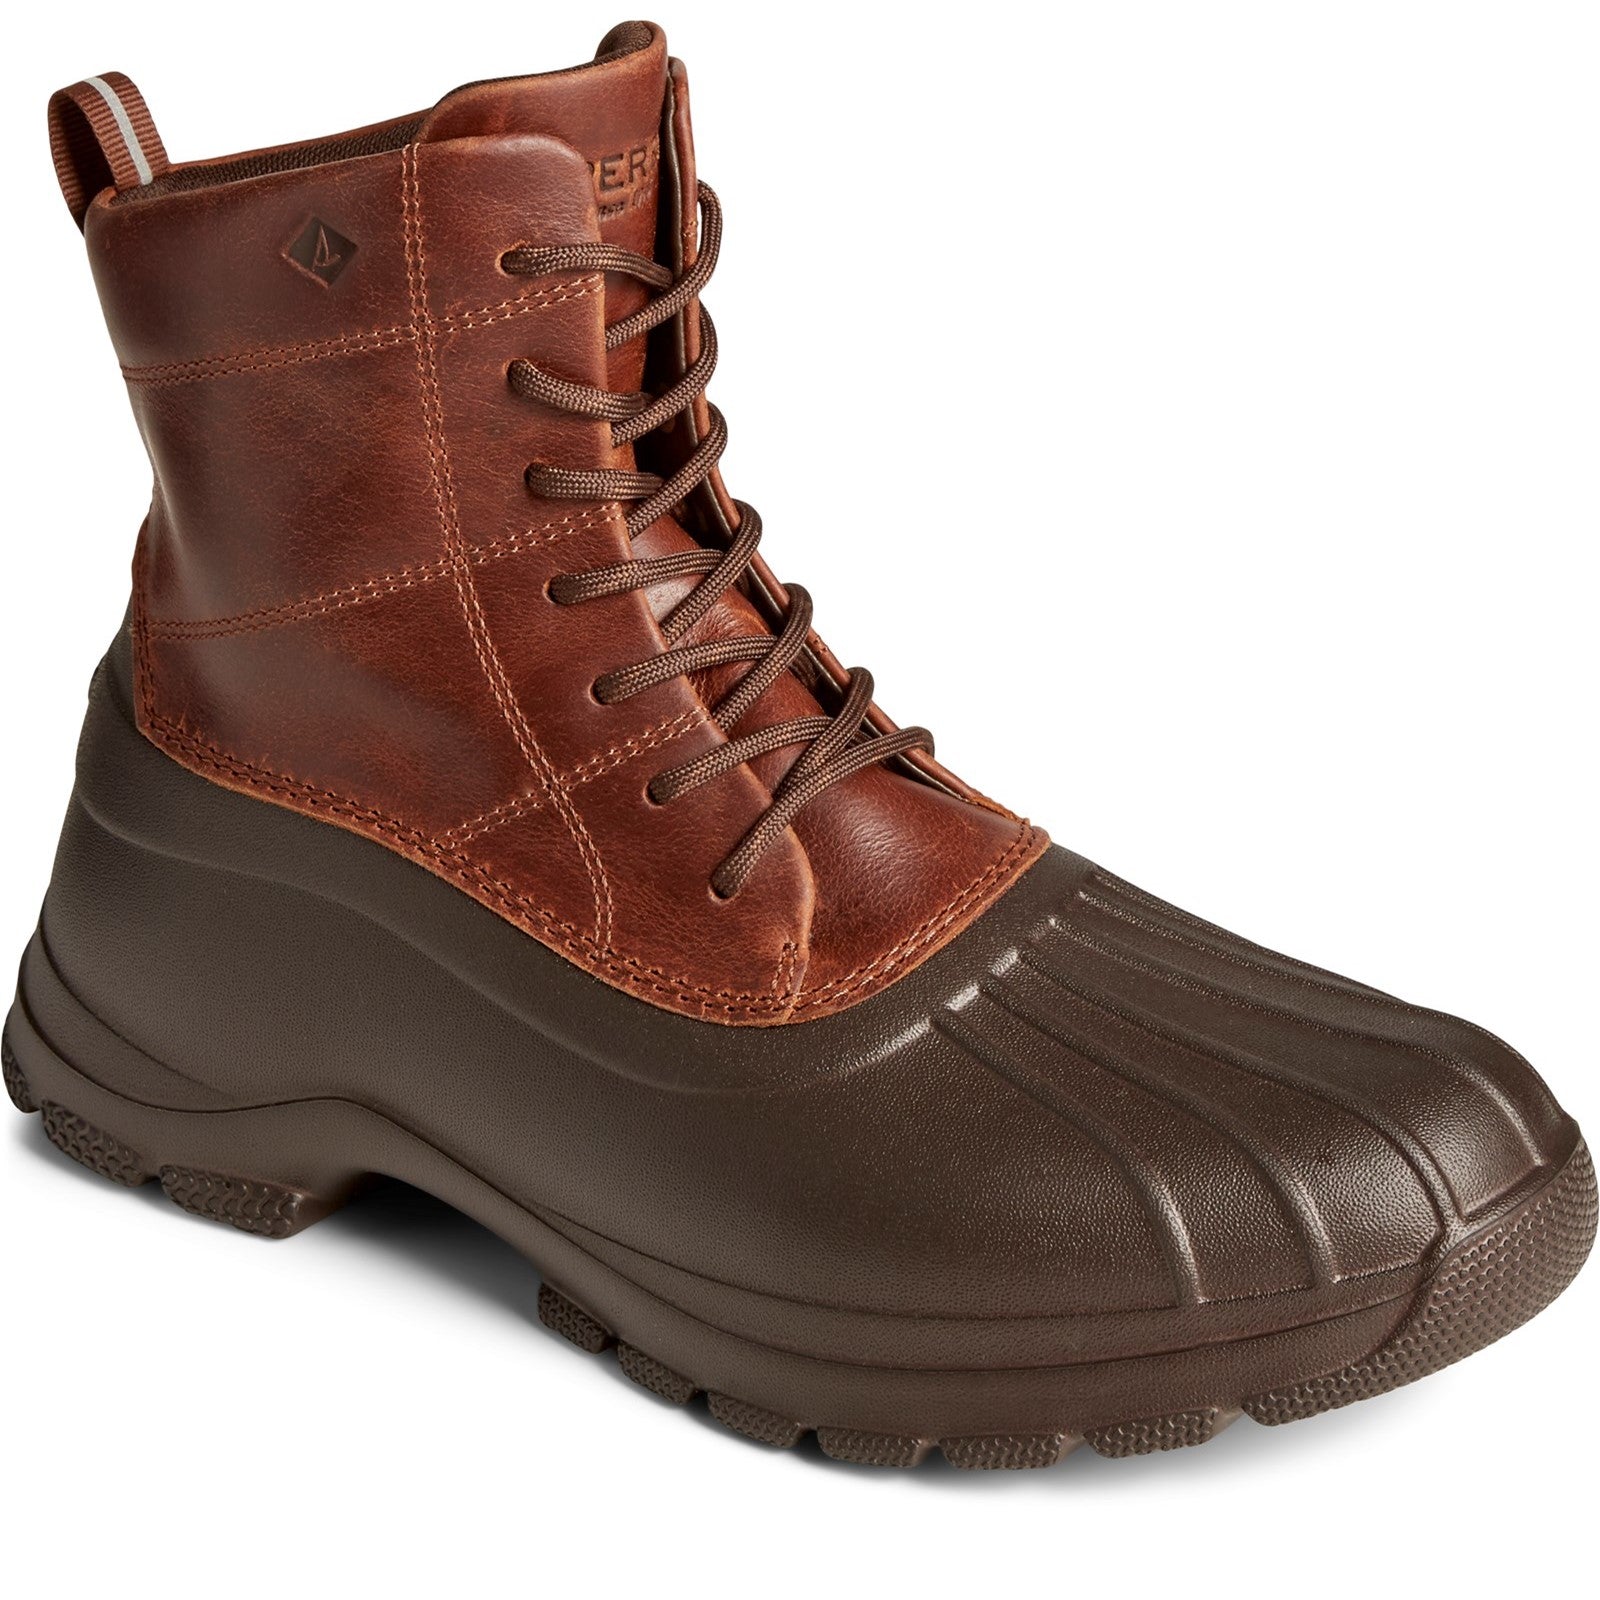 Sperry Mens Duck Float Camo Boots - Brown